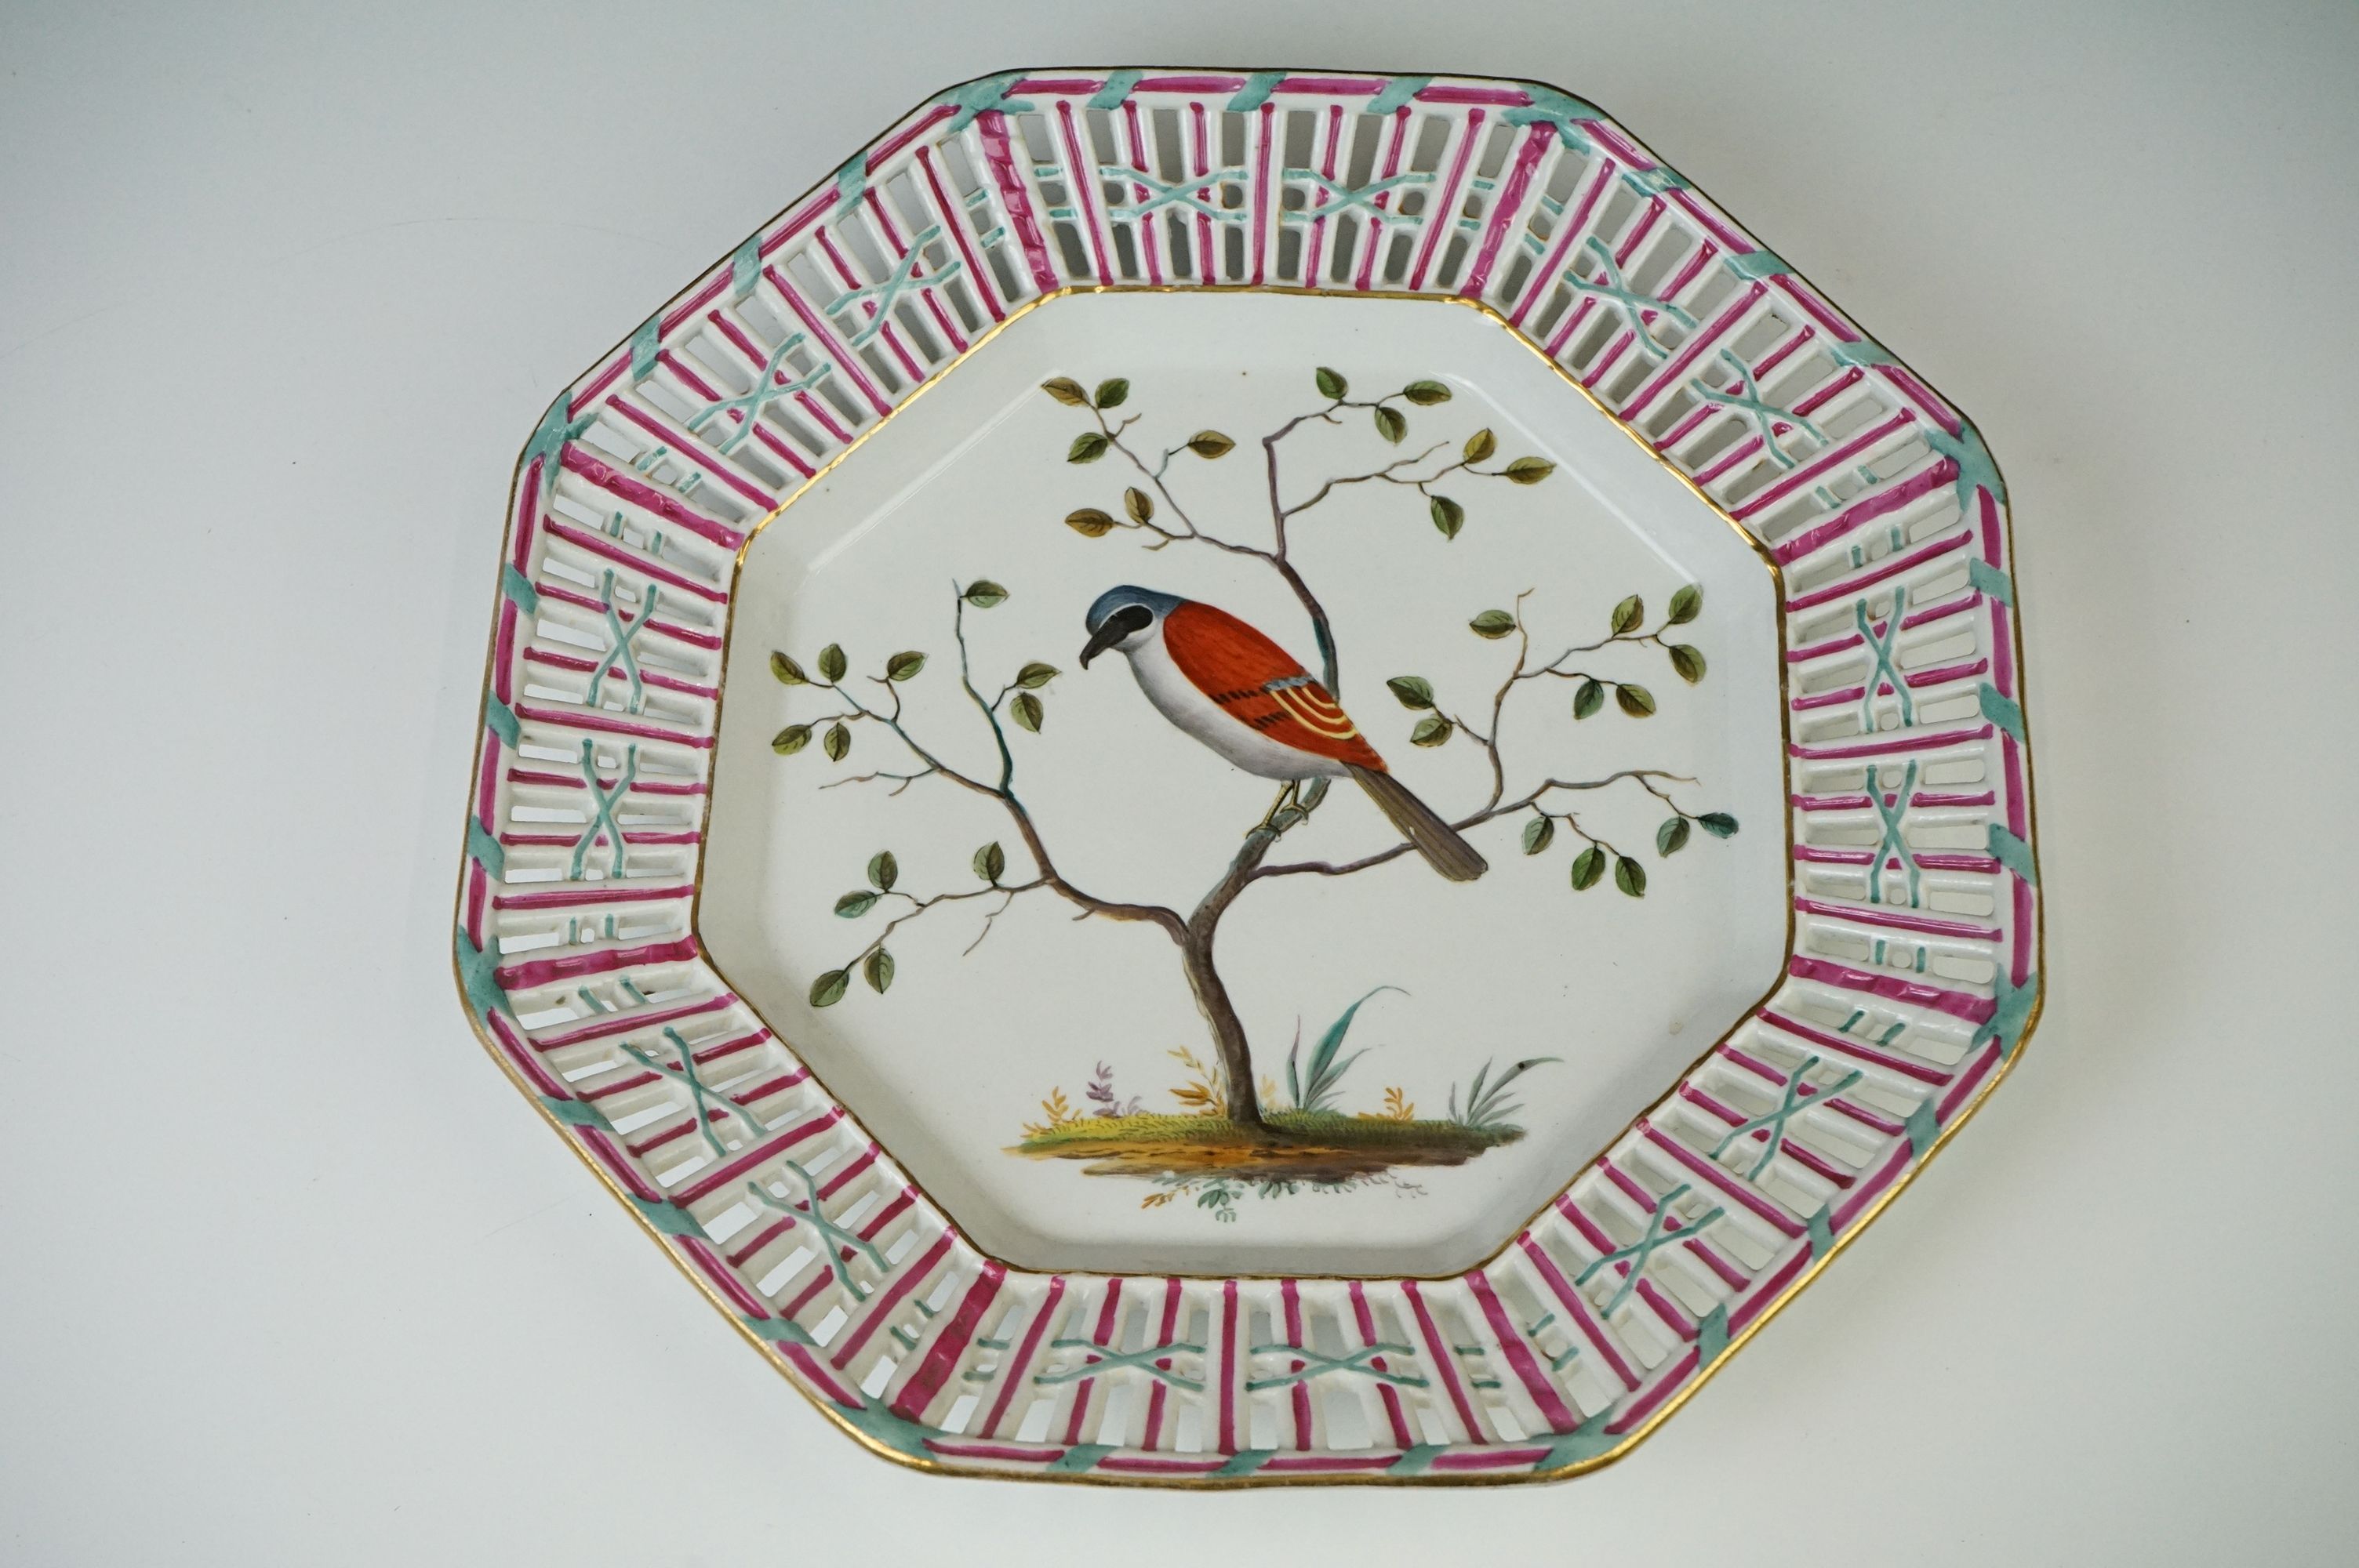 19th Century Meissen octagonal plate with pierced border and decorated with birds and insects, - Image 10 of 11